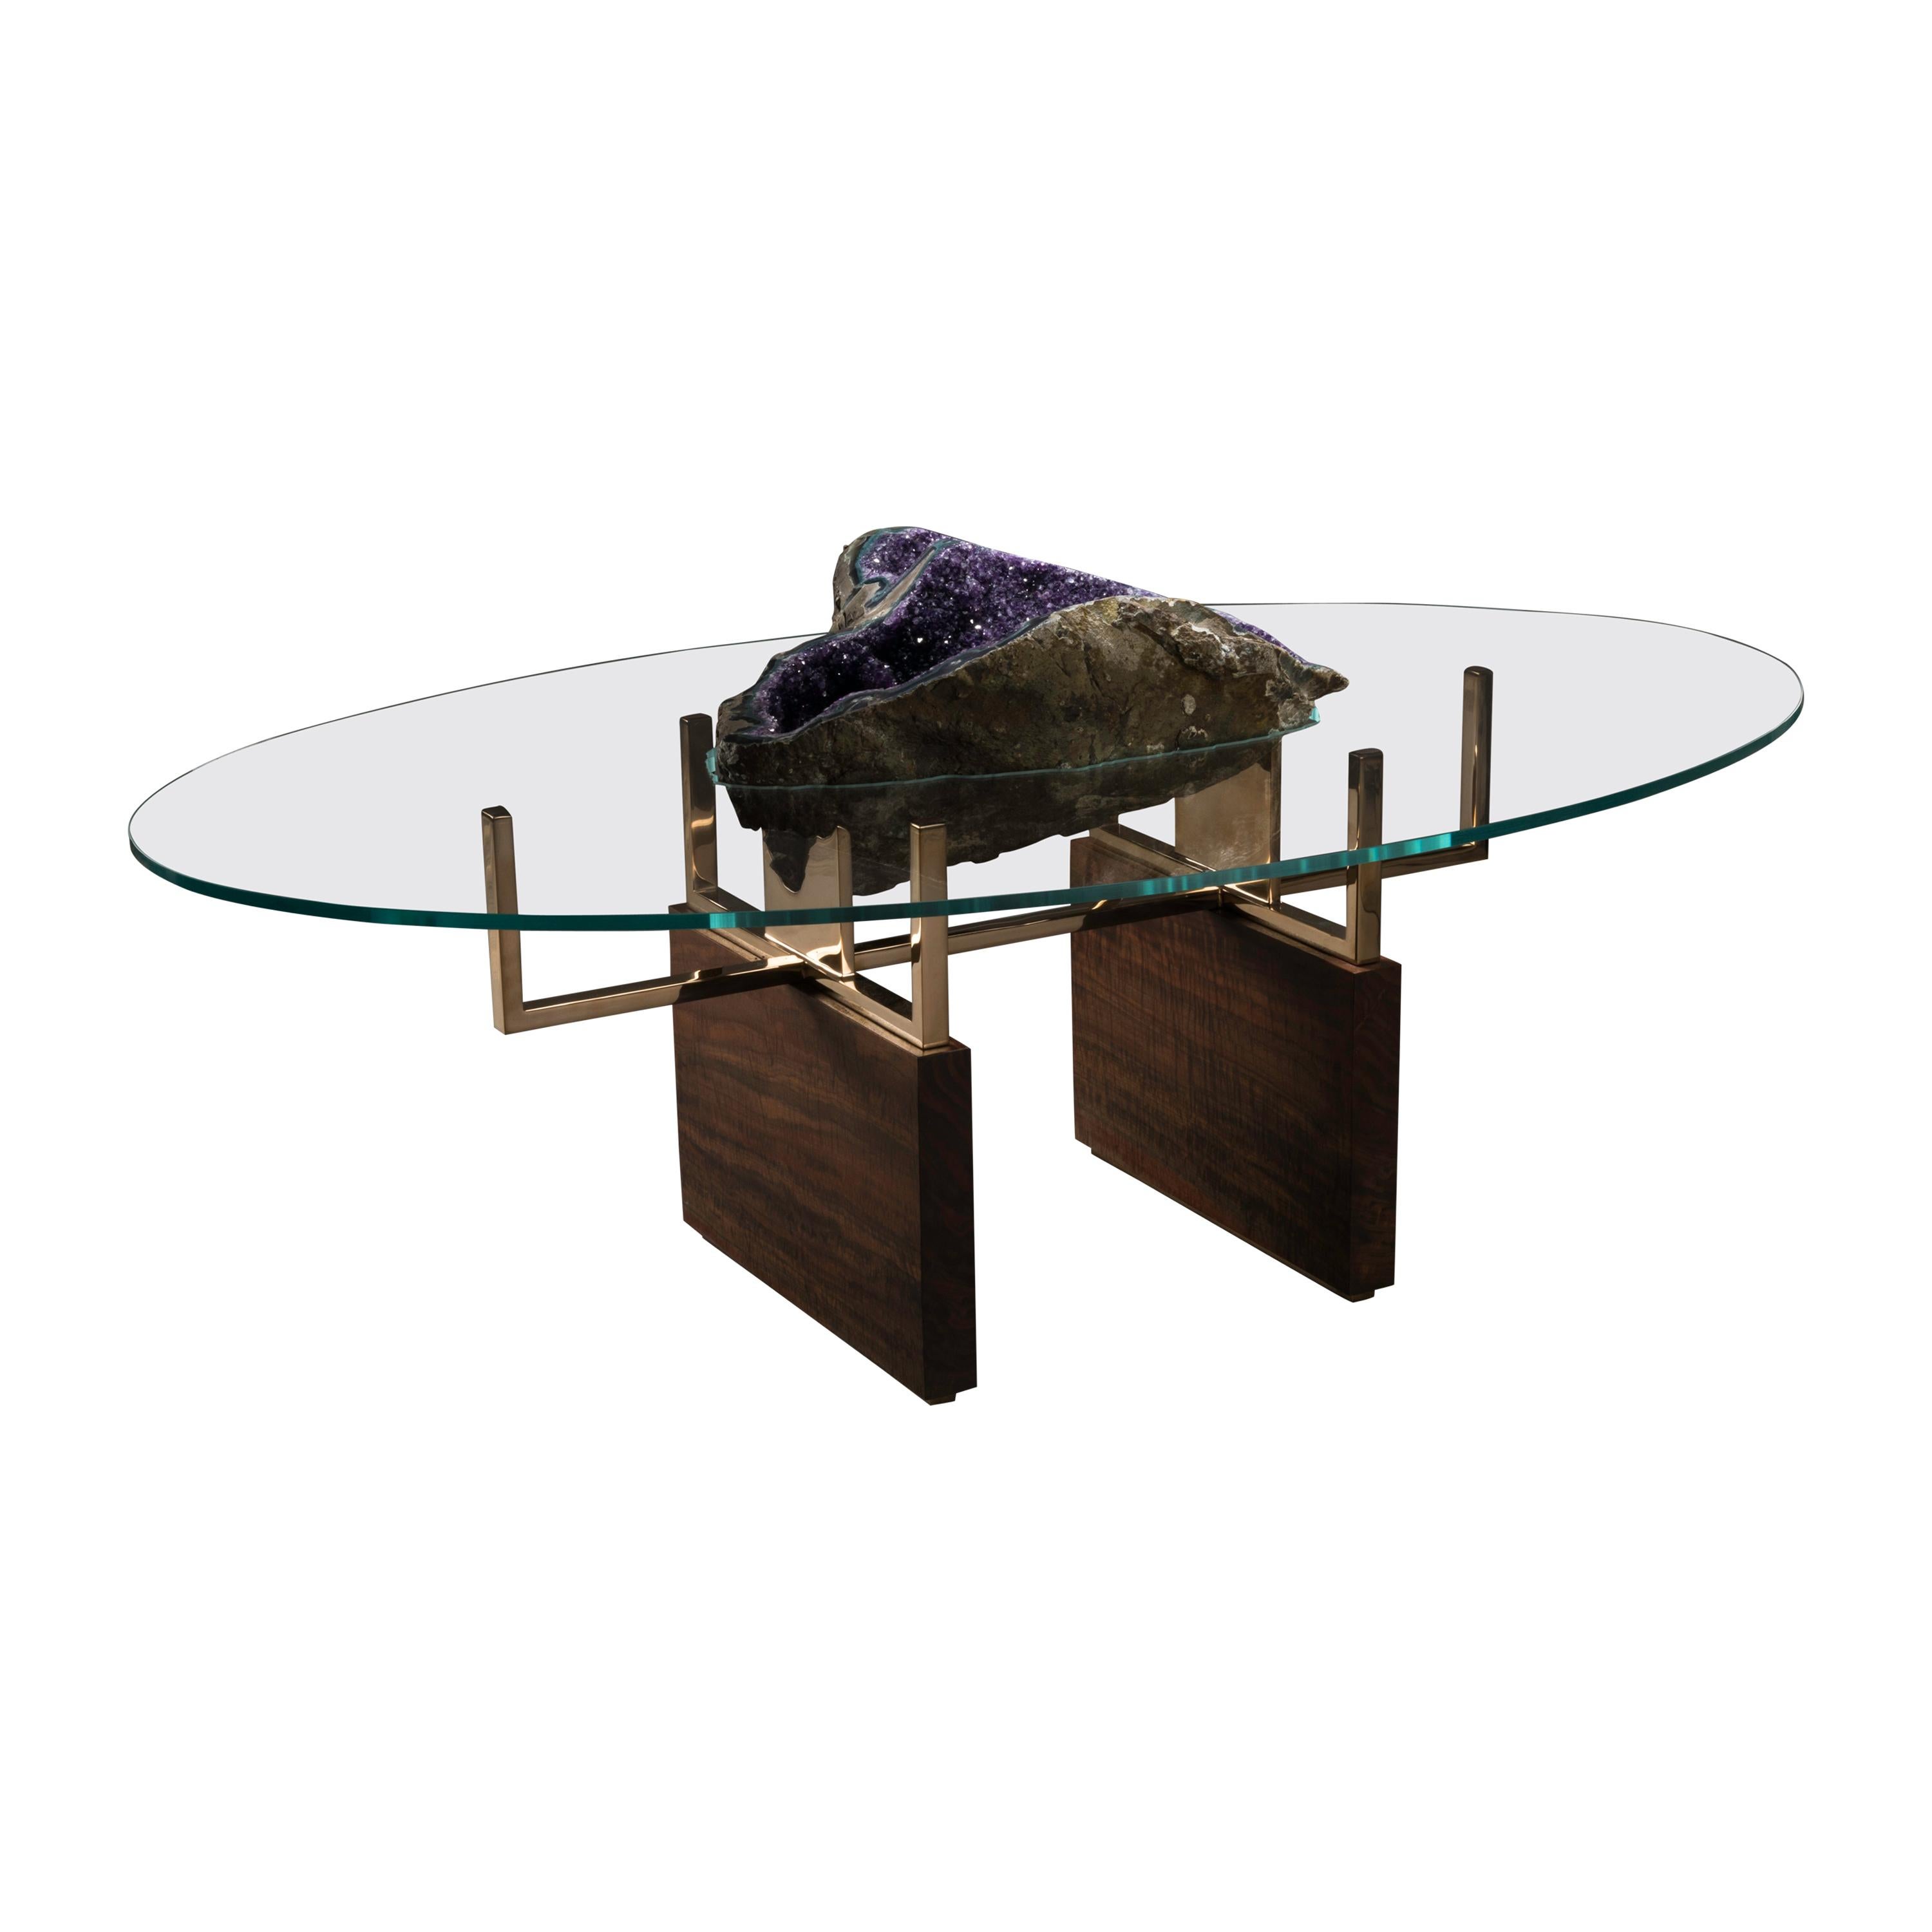 Burl Walnut Coffee Table with Inset Amethyst and Glass Top and Bronze Supports